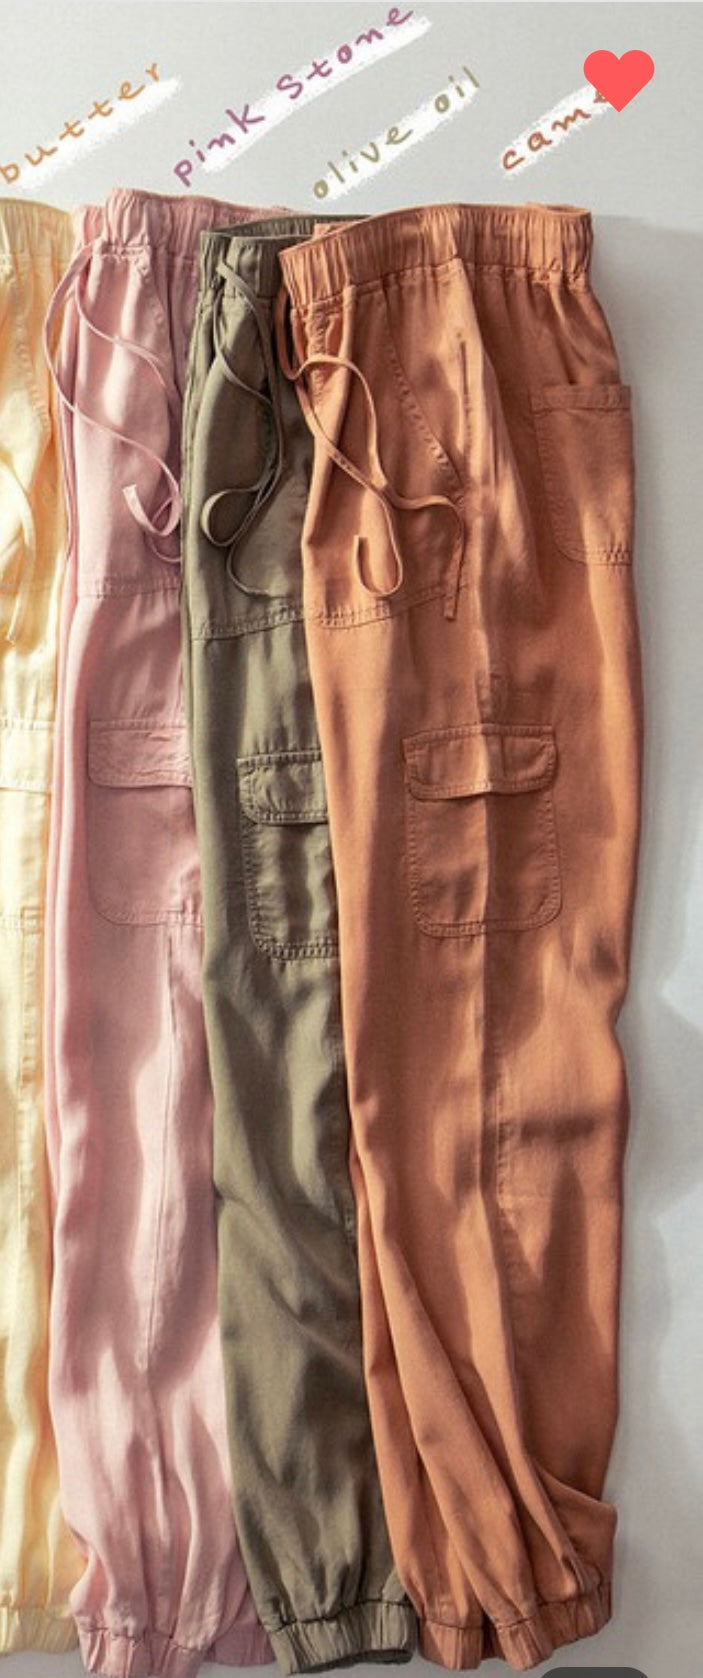 The Tenney Jogger Pants in Camel and Pink Stone